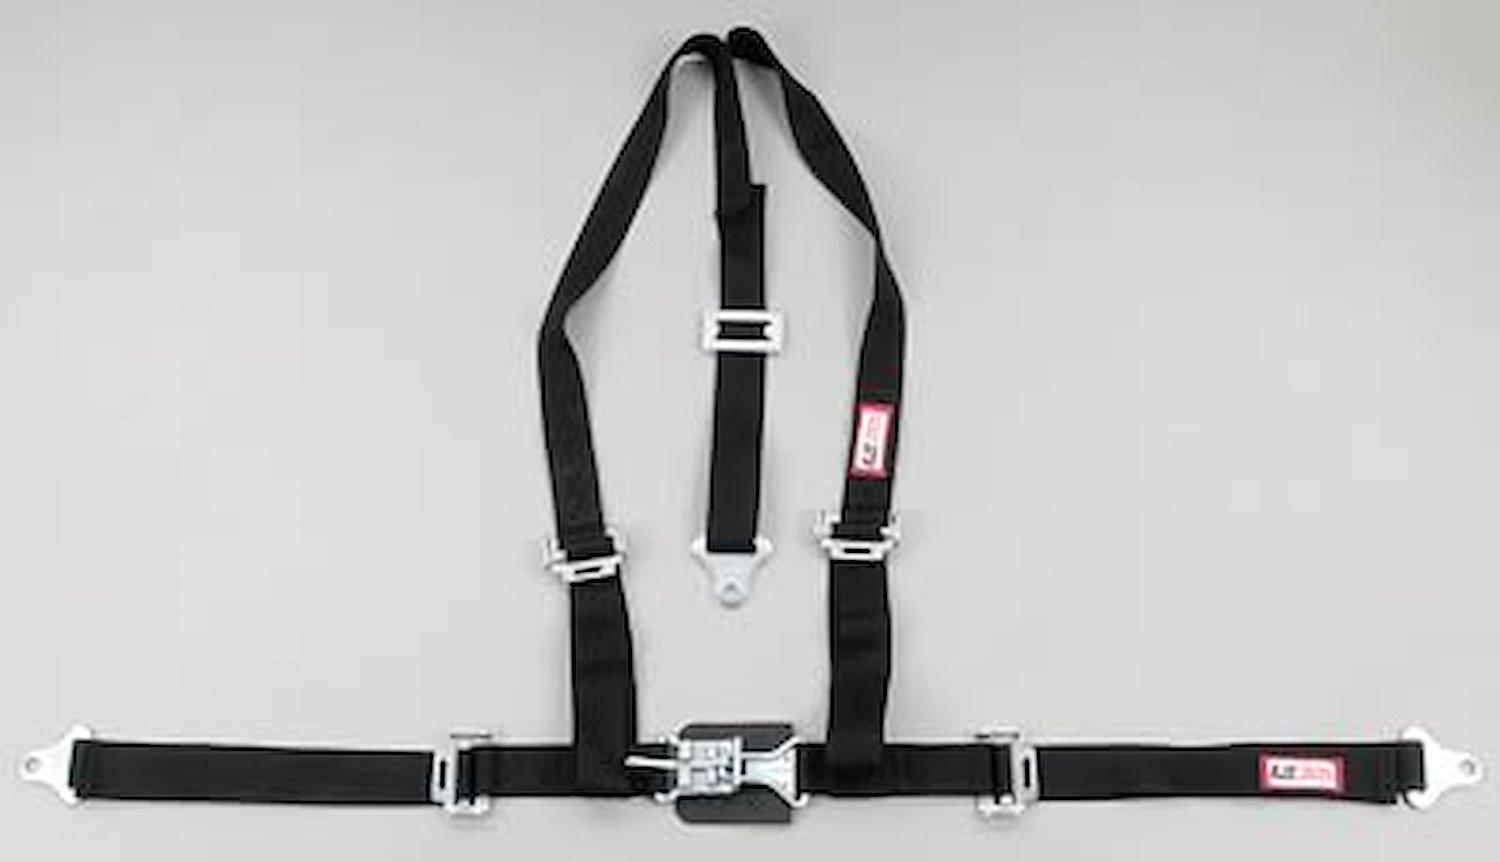 NON-SFI L&L HARNESS 3 PULL UP Lap Belt SNAP SEWN IN 2 S.H. Individual FLOOR Mount WRAP/BOLT GRAY